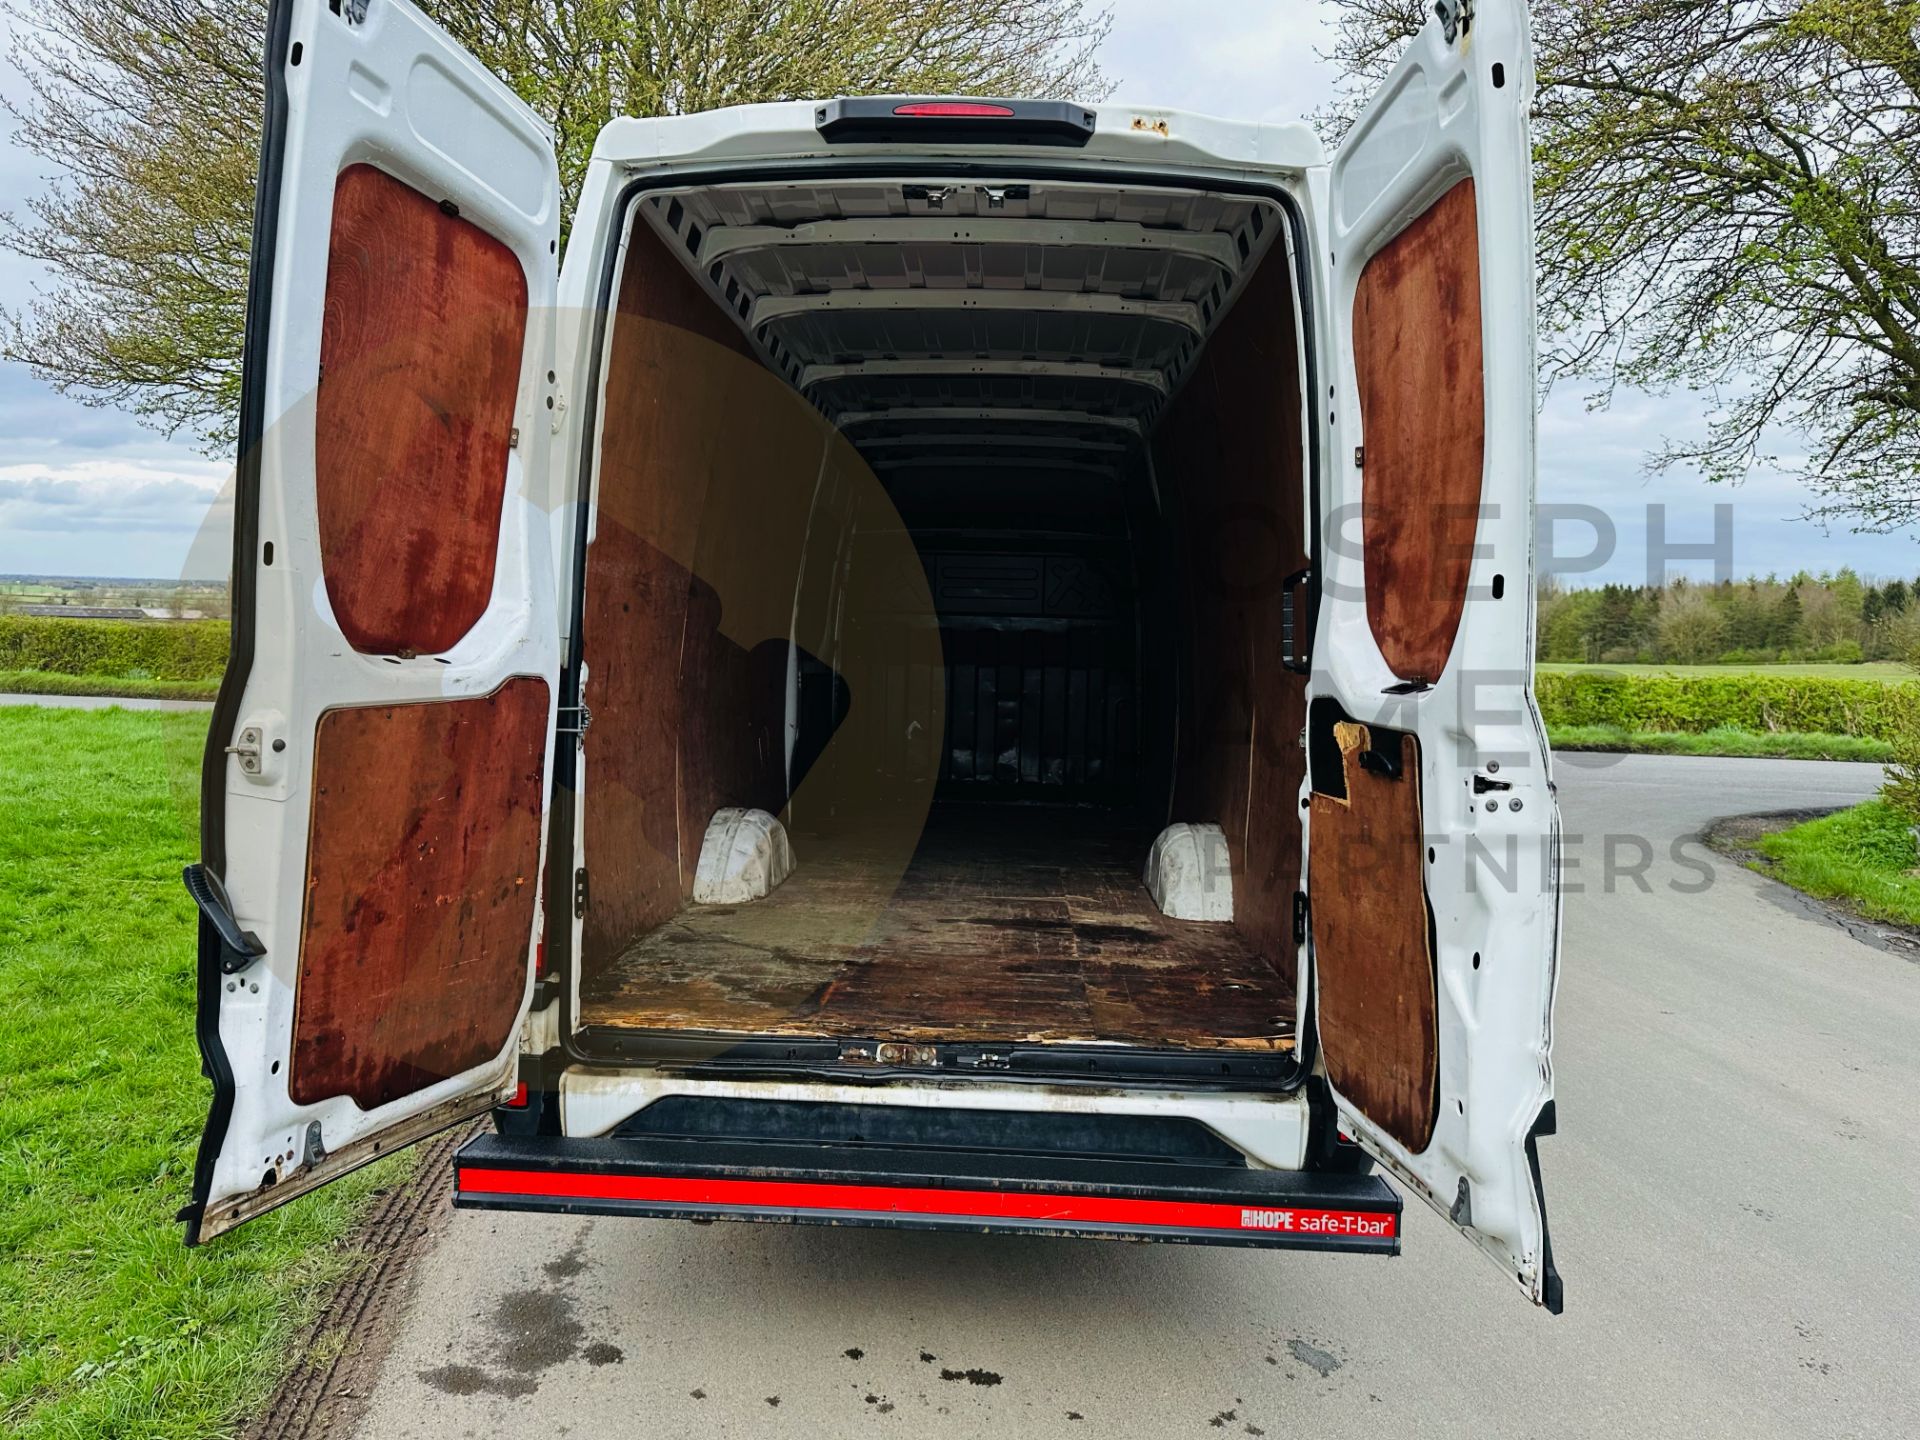 IVECO DAILY 35-140 LONG WHEEL BASE HIFG ROOF - 2021 REG (NEW SHAPE) ONLY 85K MILES - AIR CON - LOOK! - Image 11 of 30